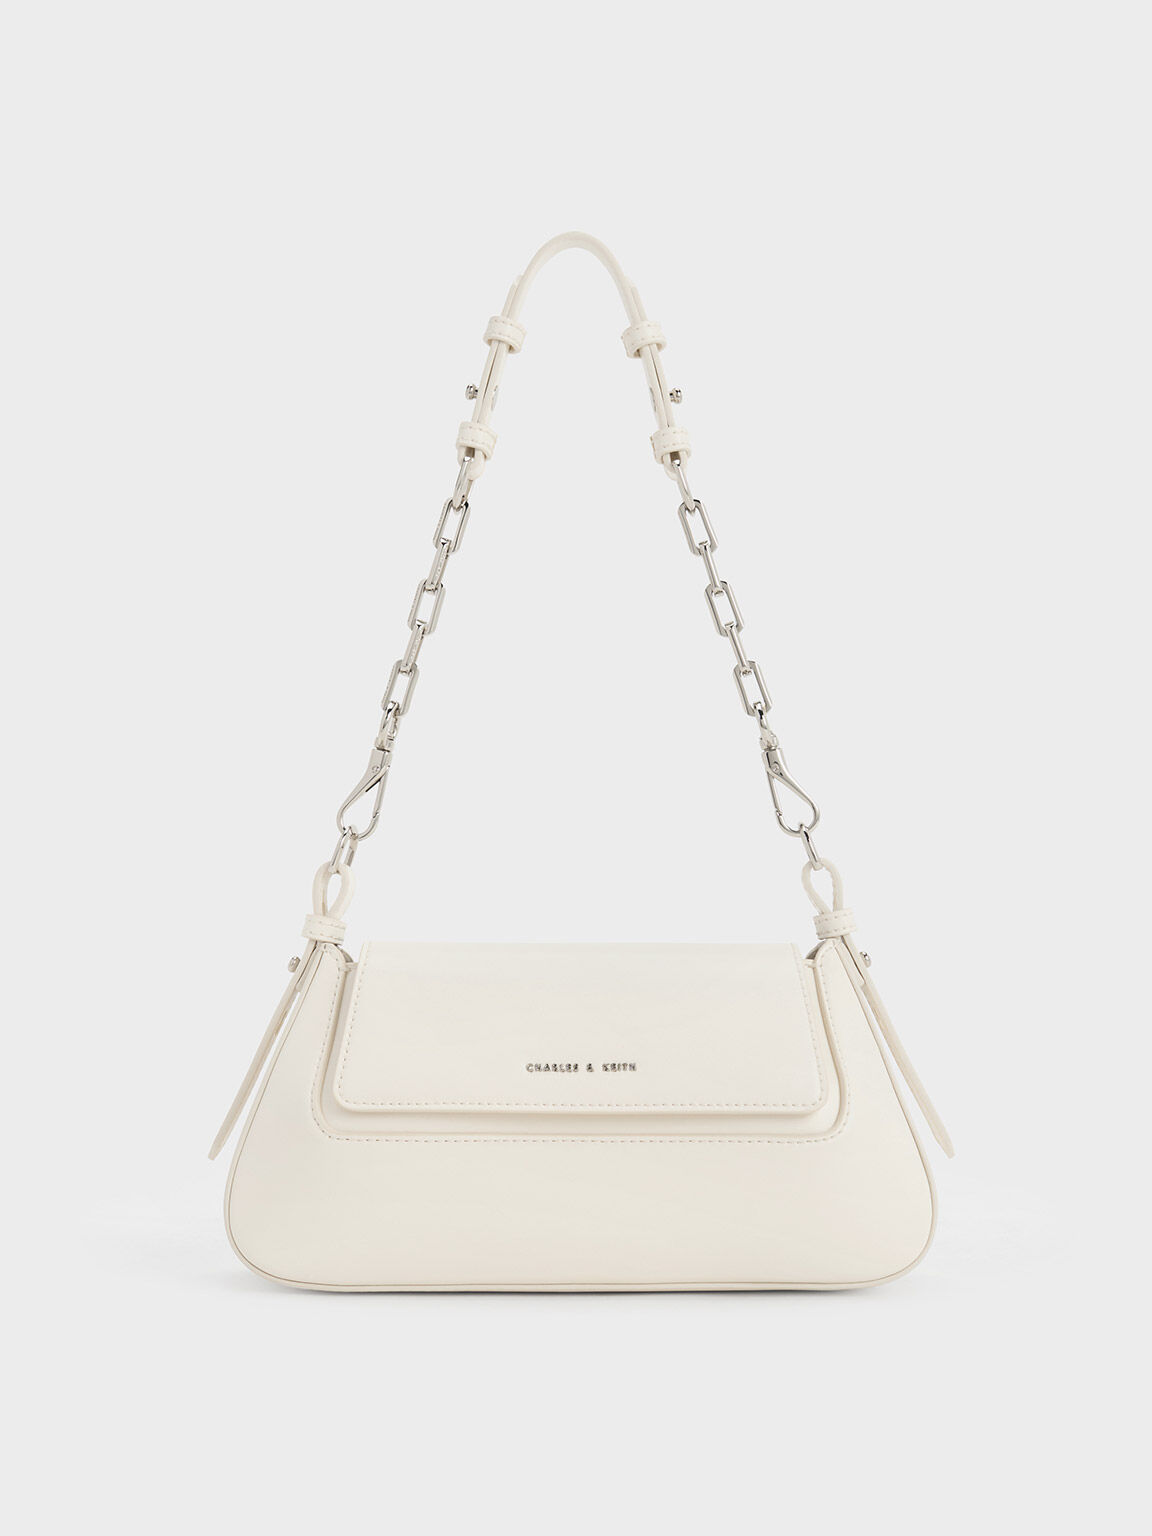 CHARLES & KEITH Two-Tone Faux Leather Front-Logo Top-Handle Crossbody Bag  for Women - Olive and Beige price in Egypt,  Egypt